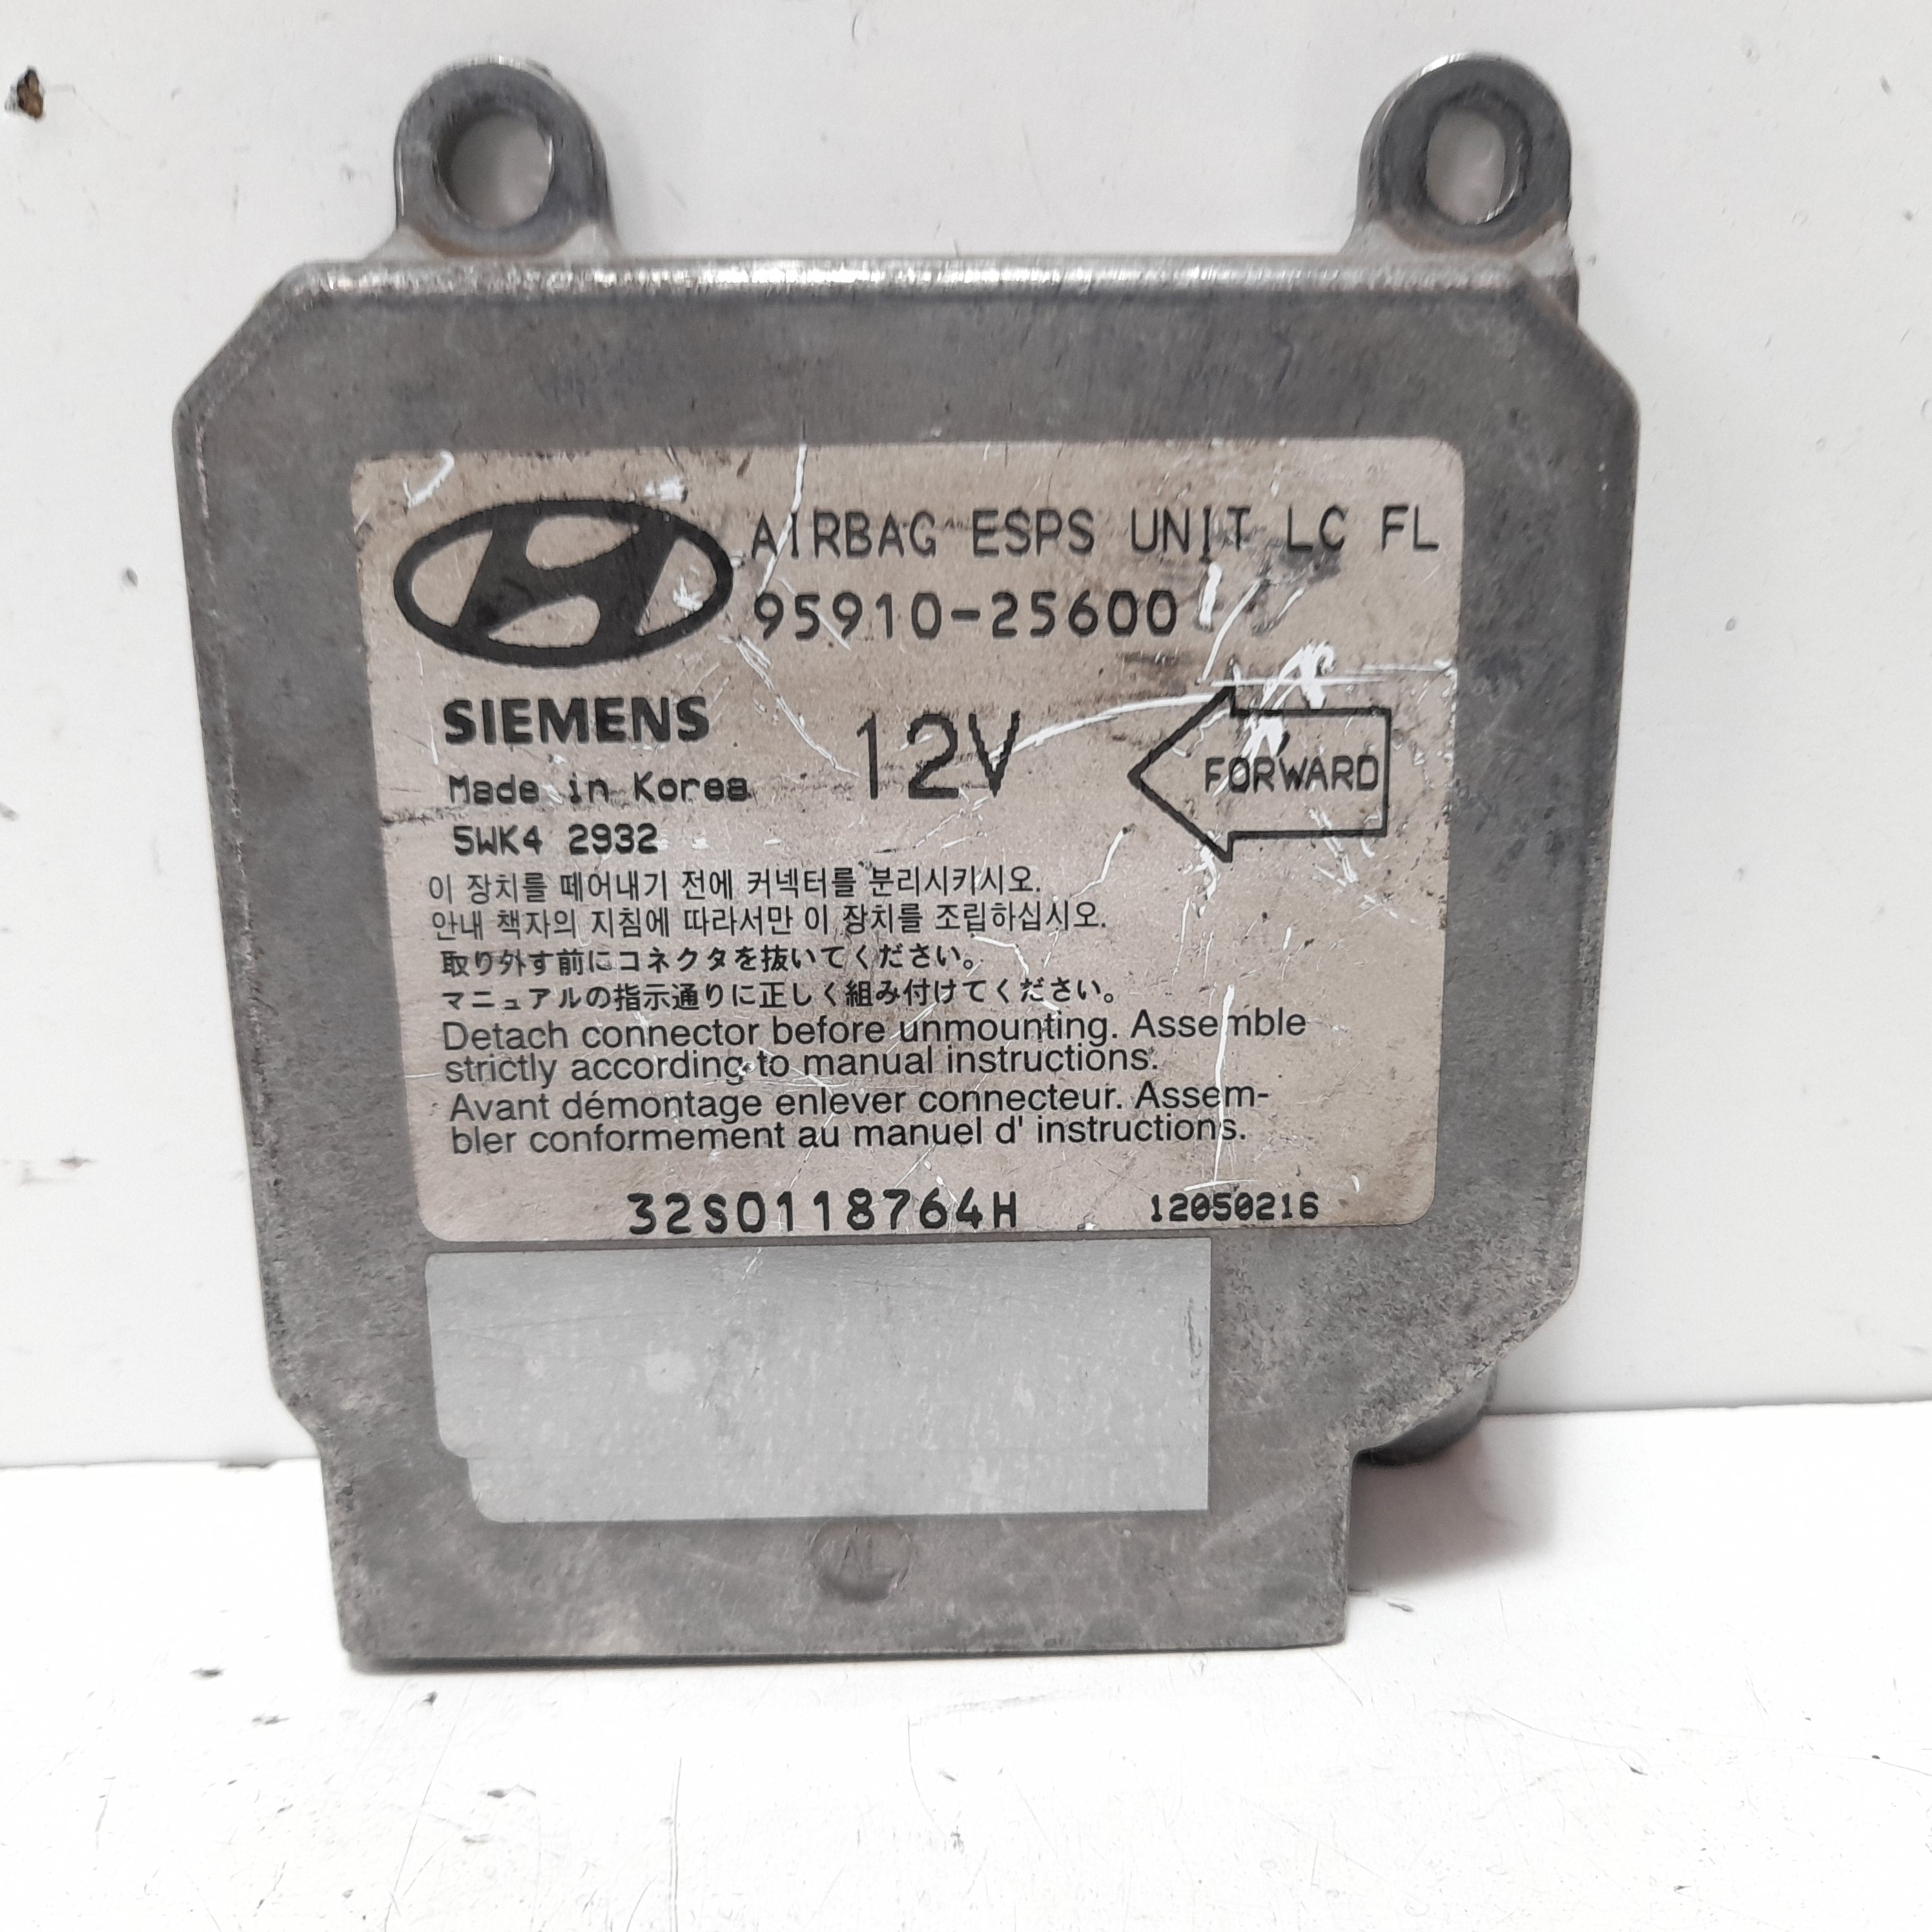 DAEWOO Accent LC (1999-2013) SRS Control Unit 9591025600 21998321